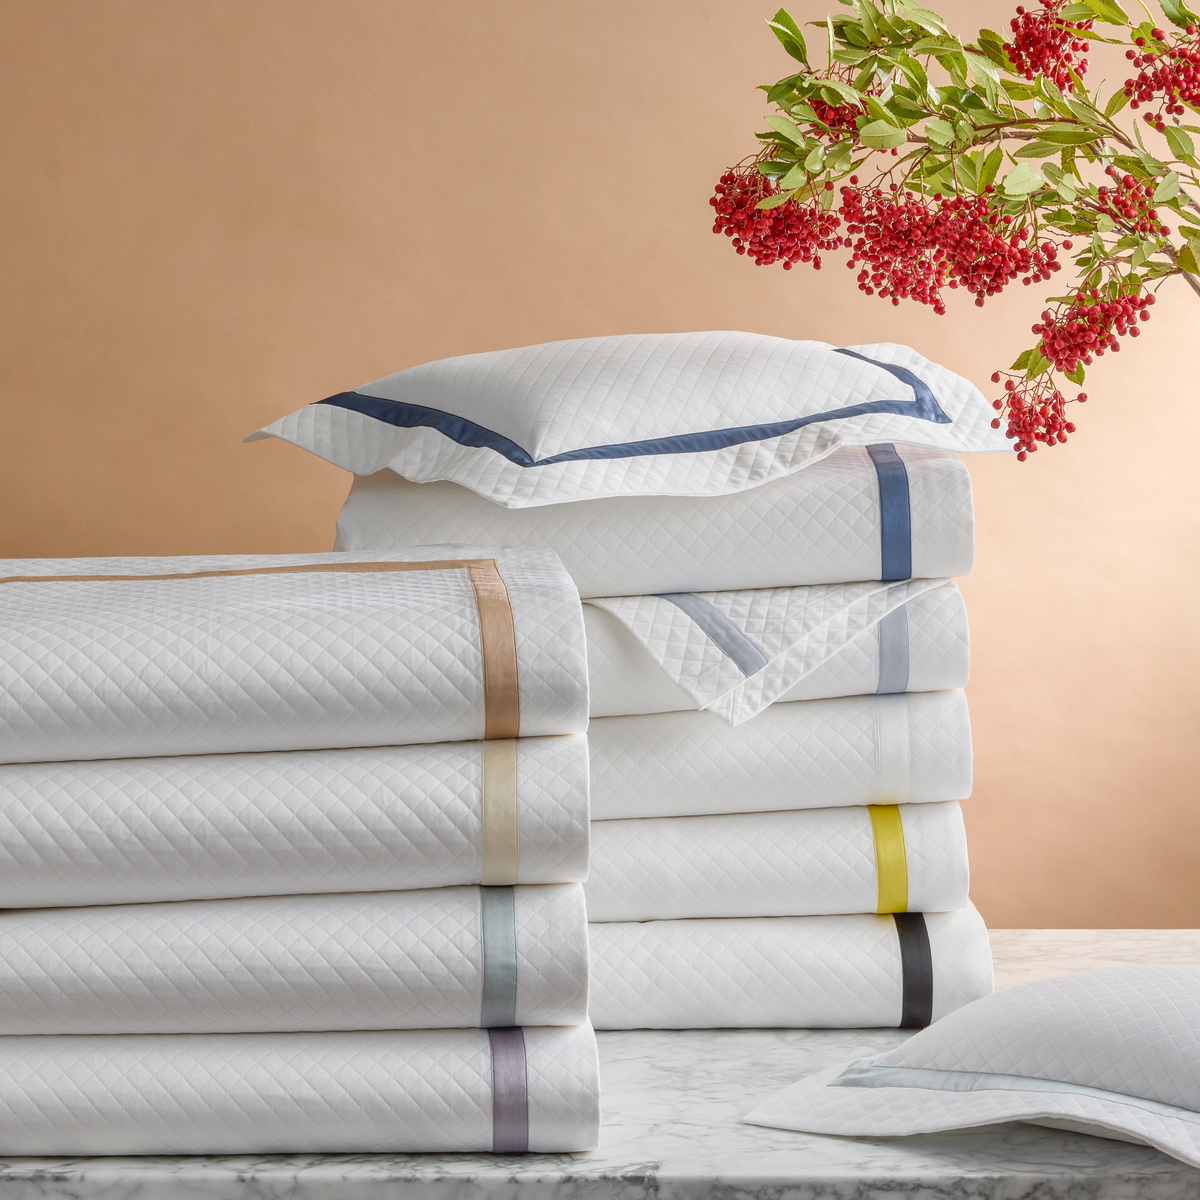 Stack of Matouk Lowell Matelassé Bedding in All Colors